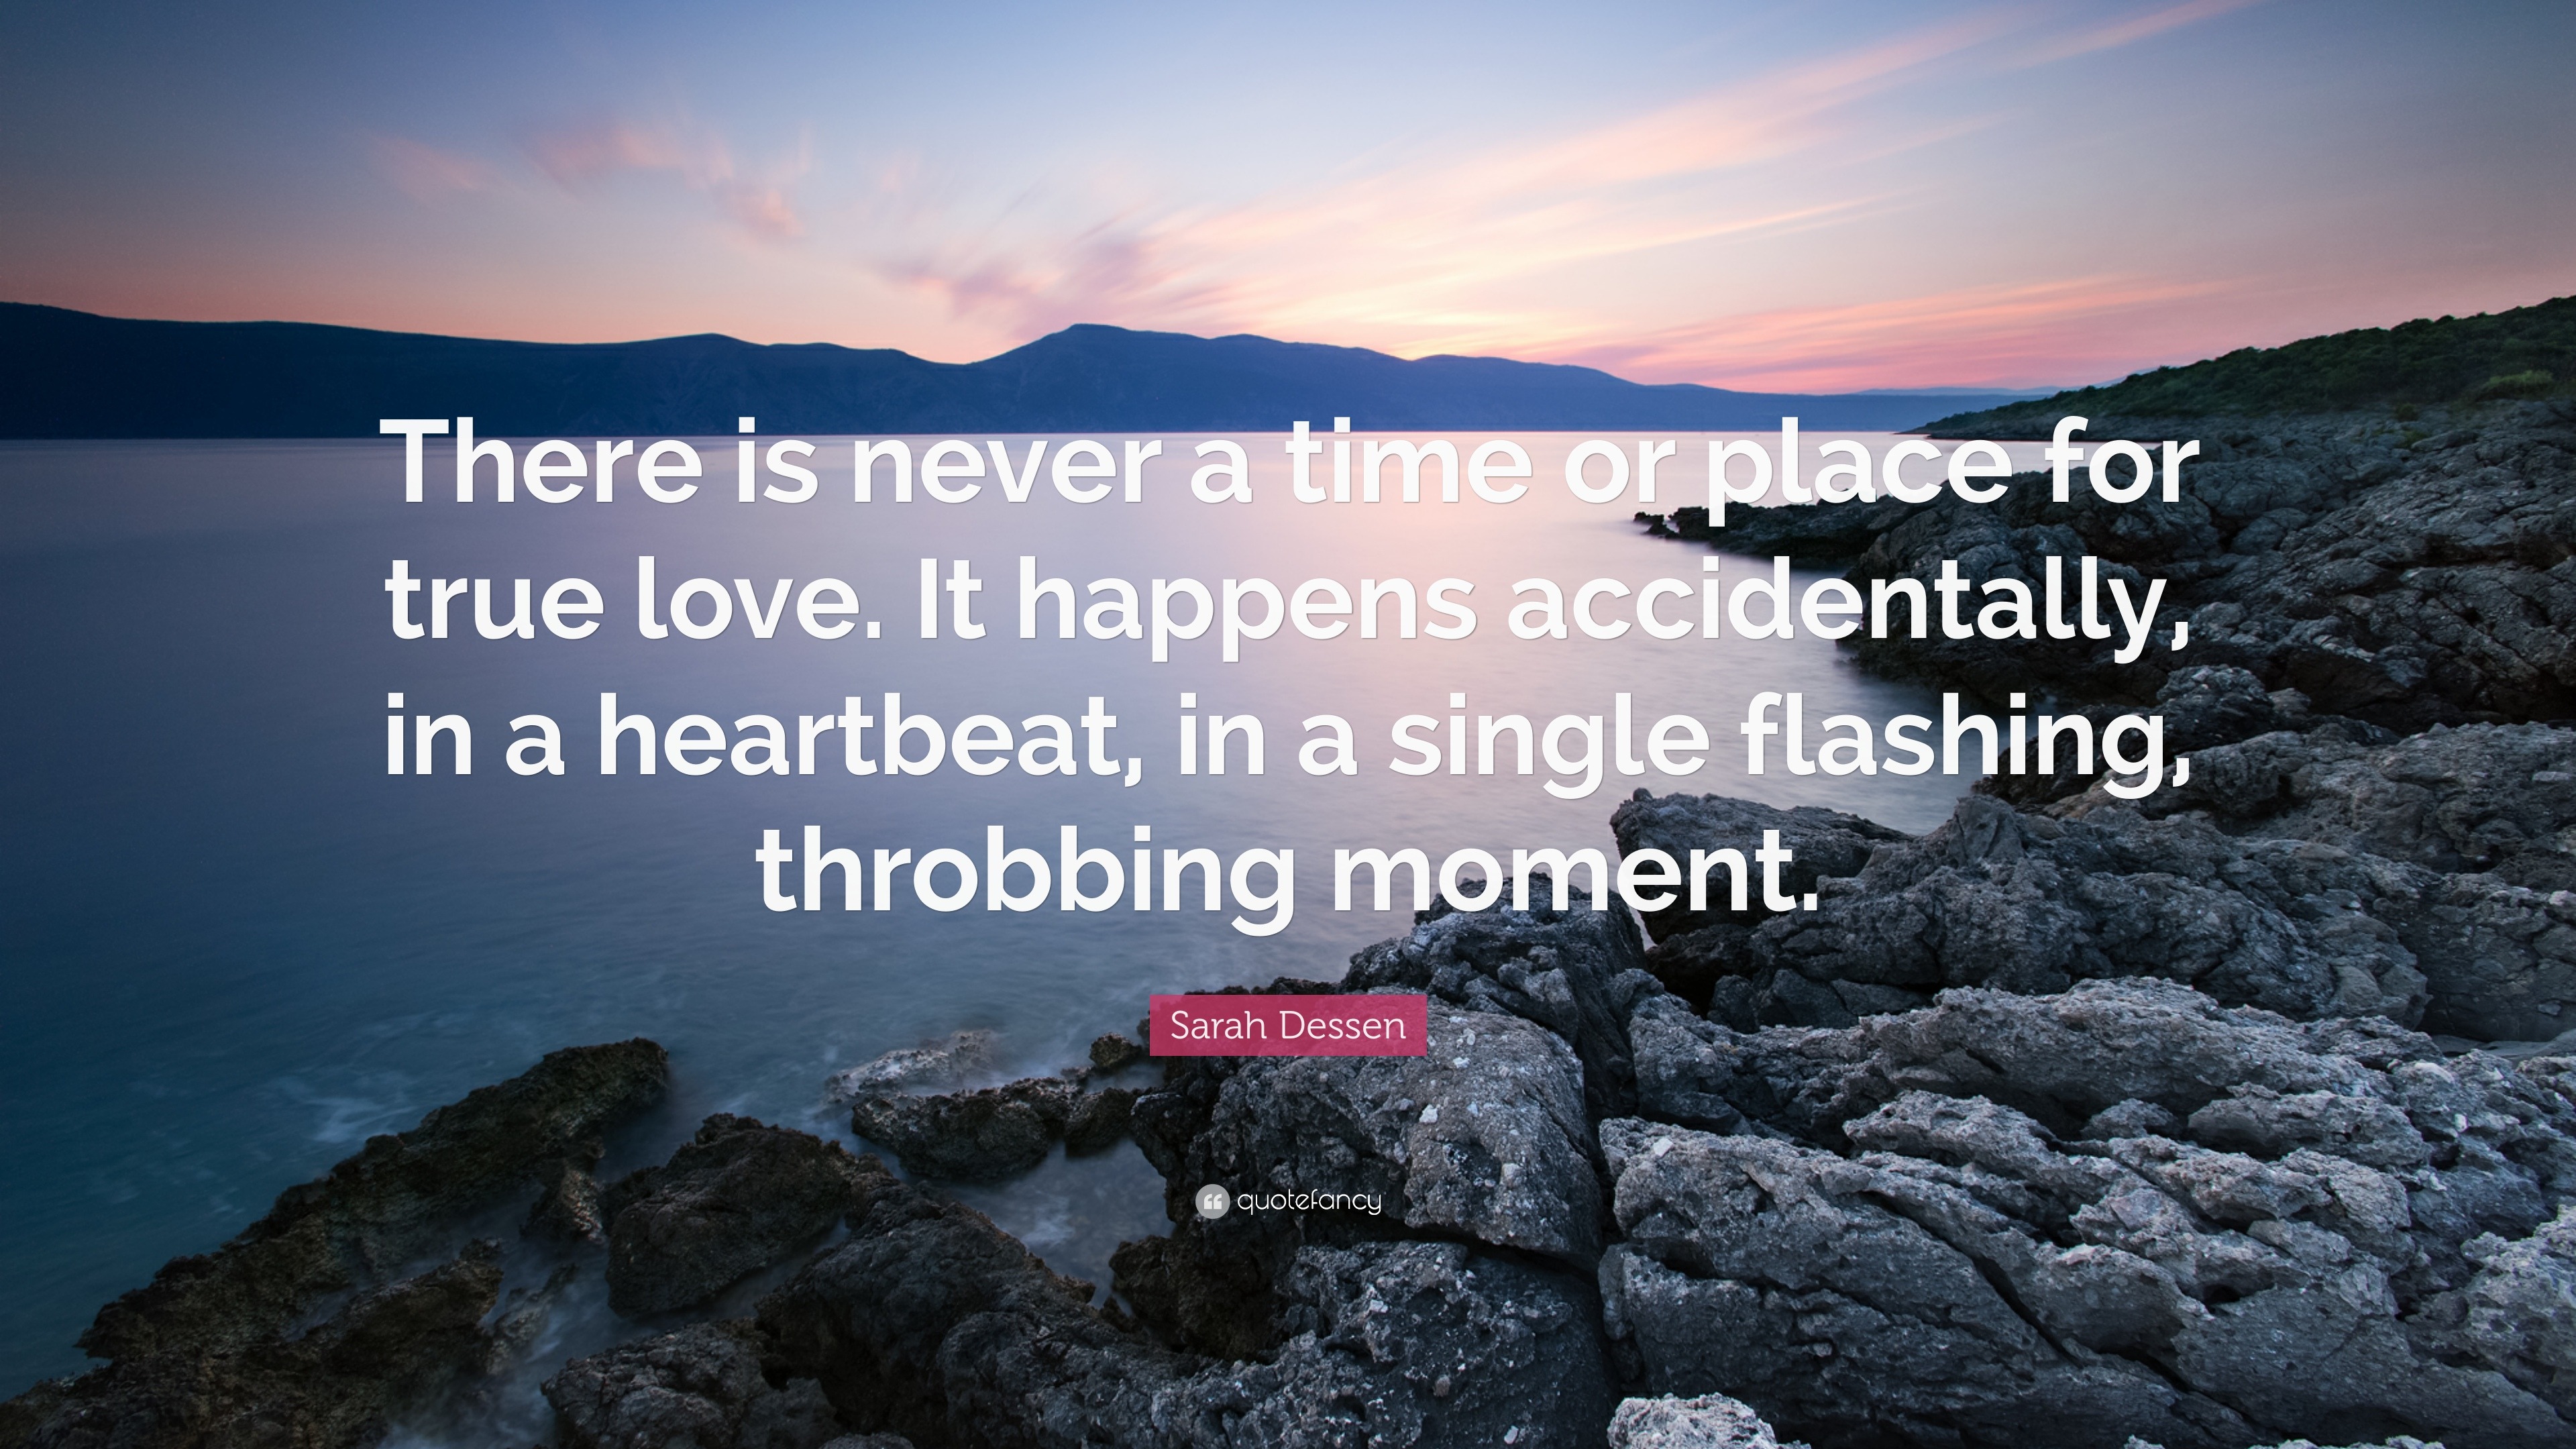 Sarah Dessen Quote “There is never a time or place for true love